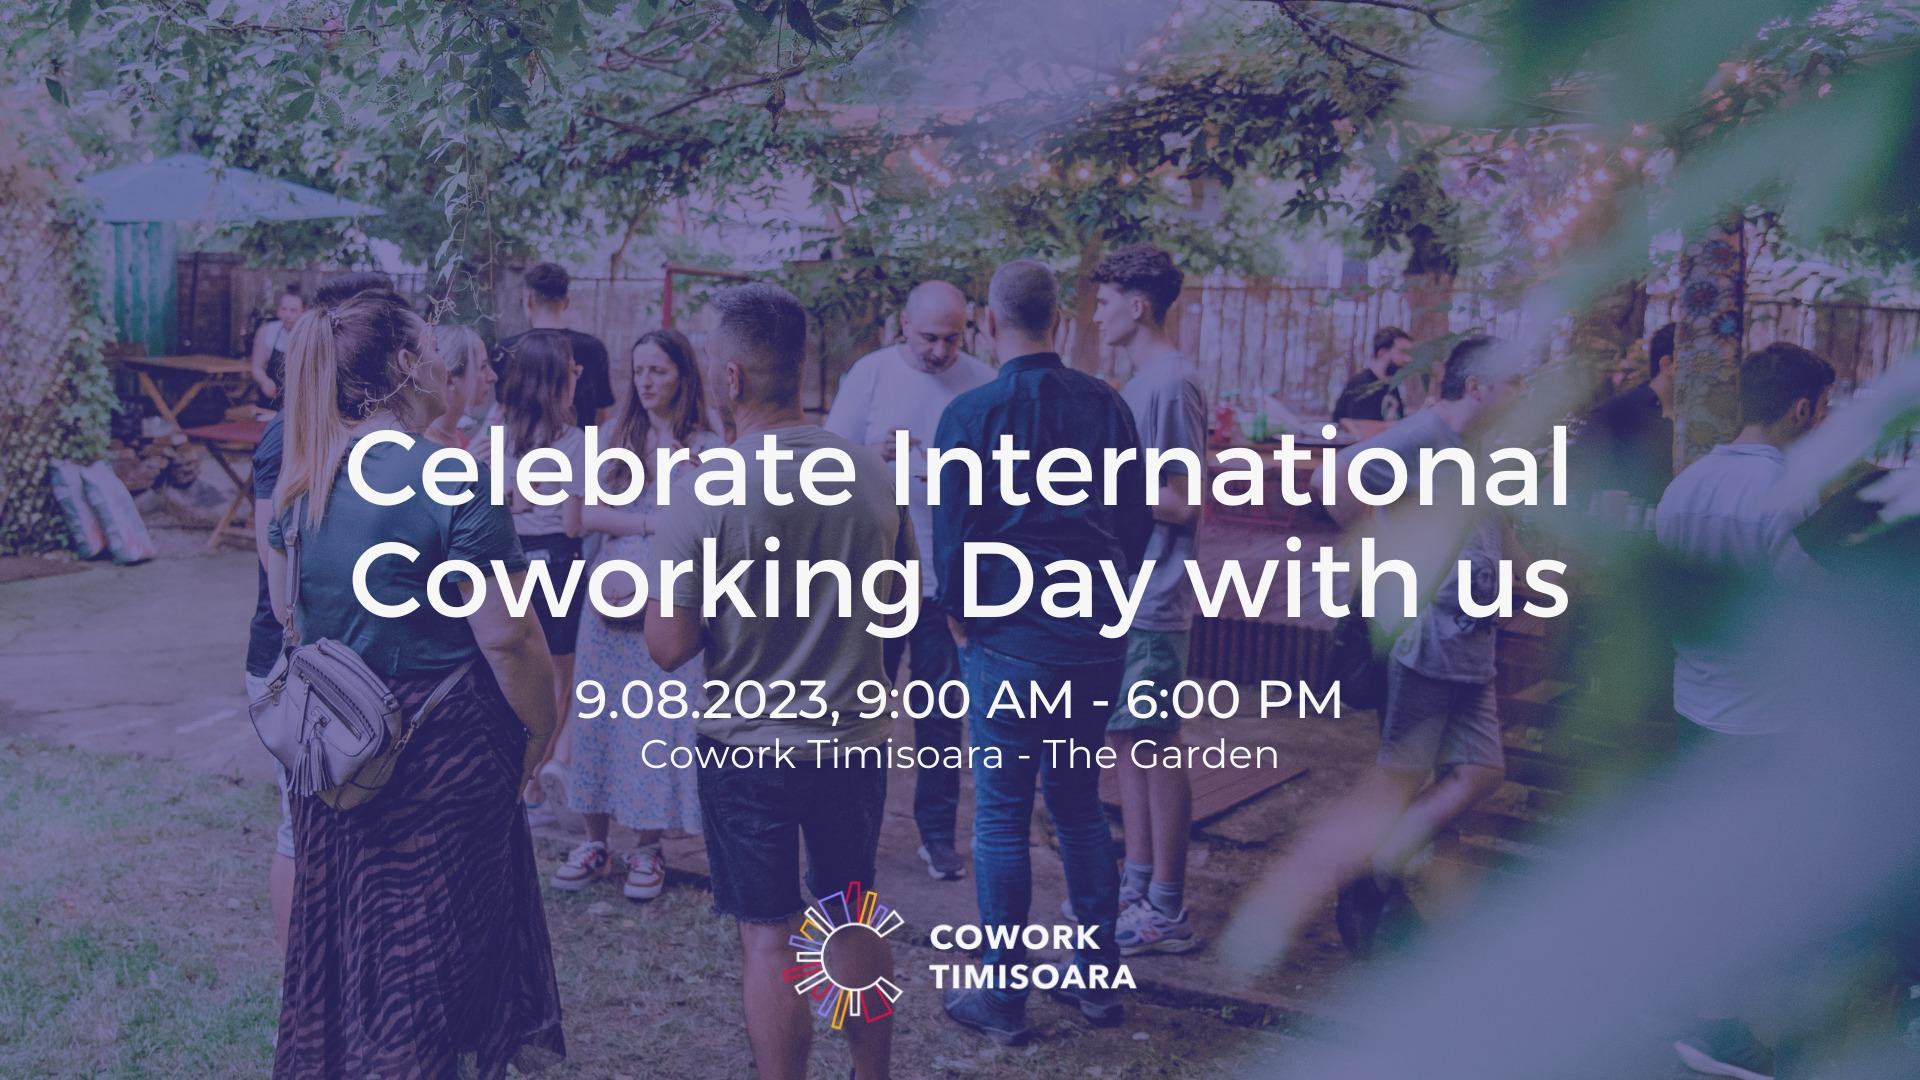 Celebrate International Cowrking Day with us!